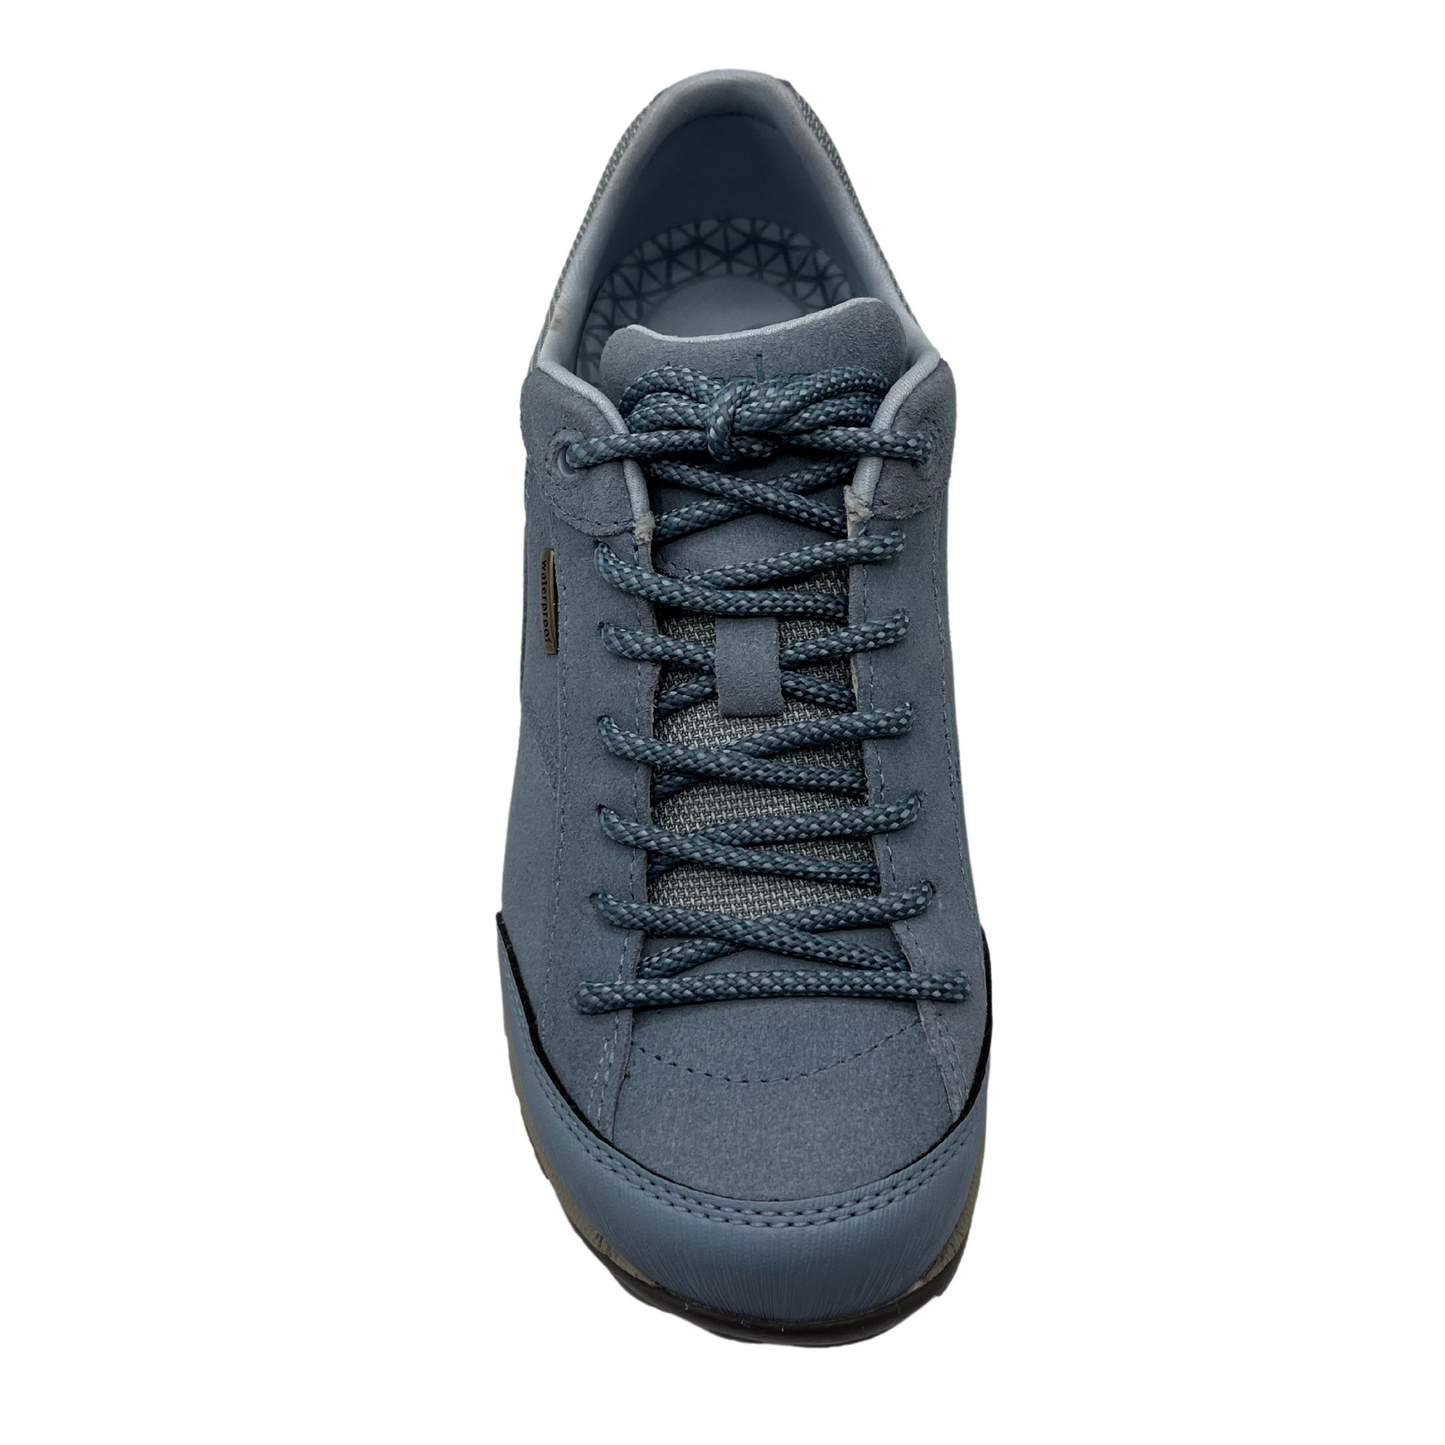 Top view of sky blue hiking shoe with matching laces